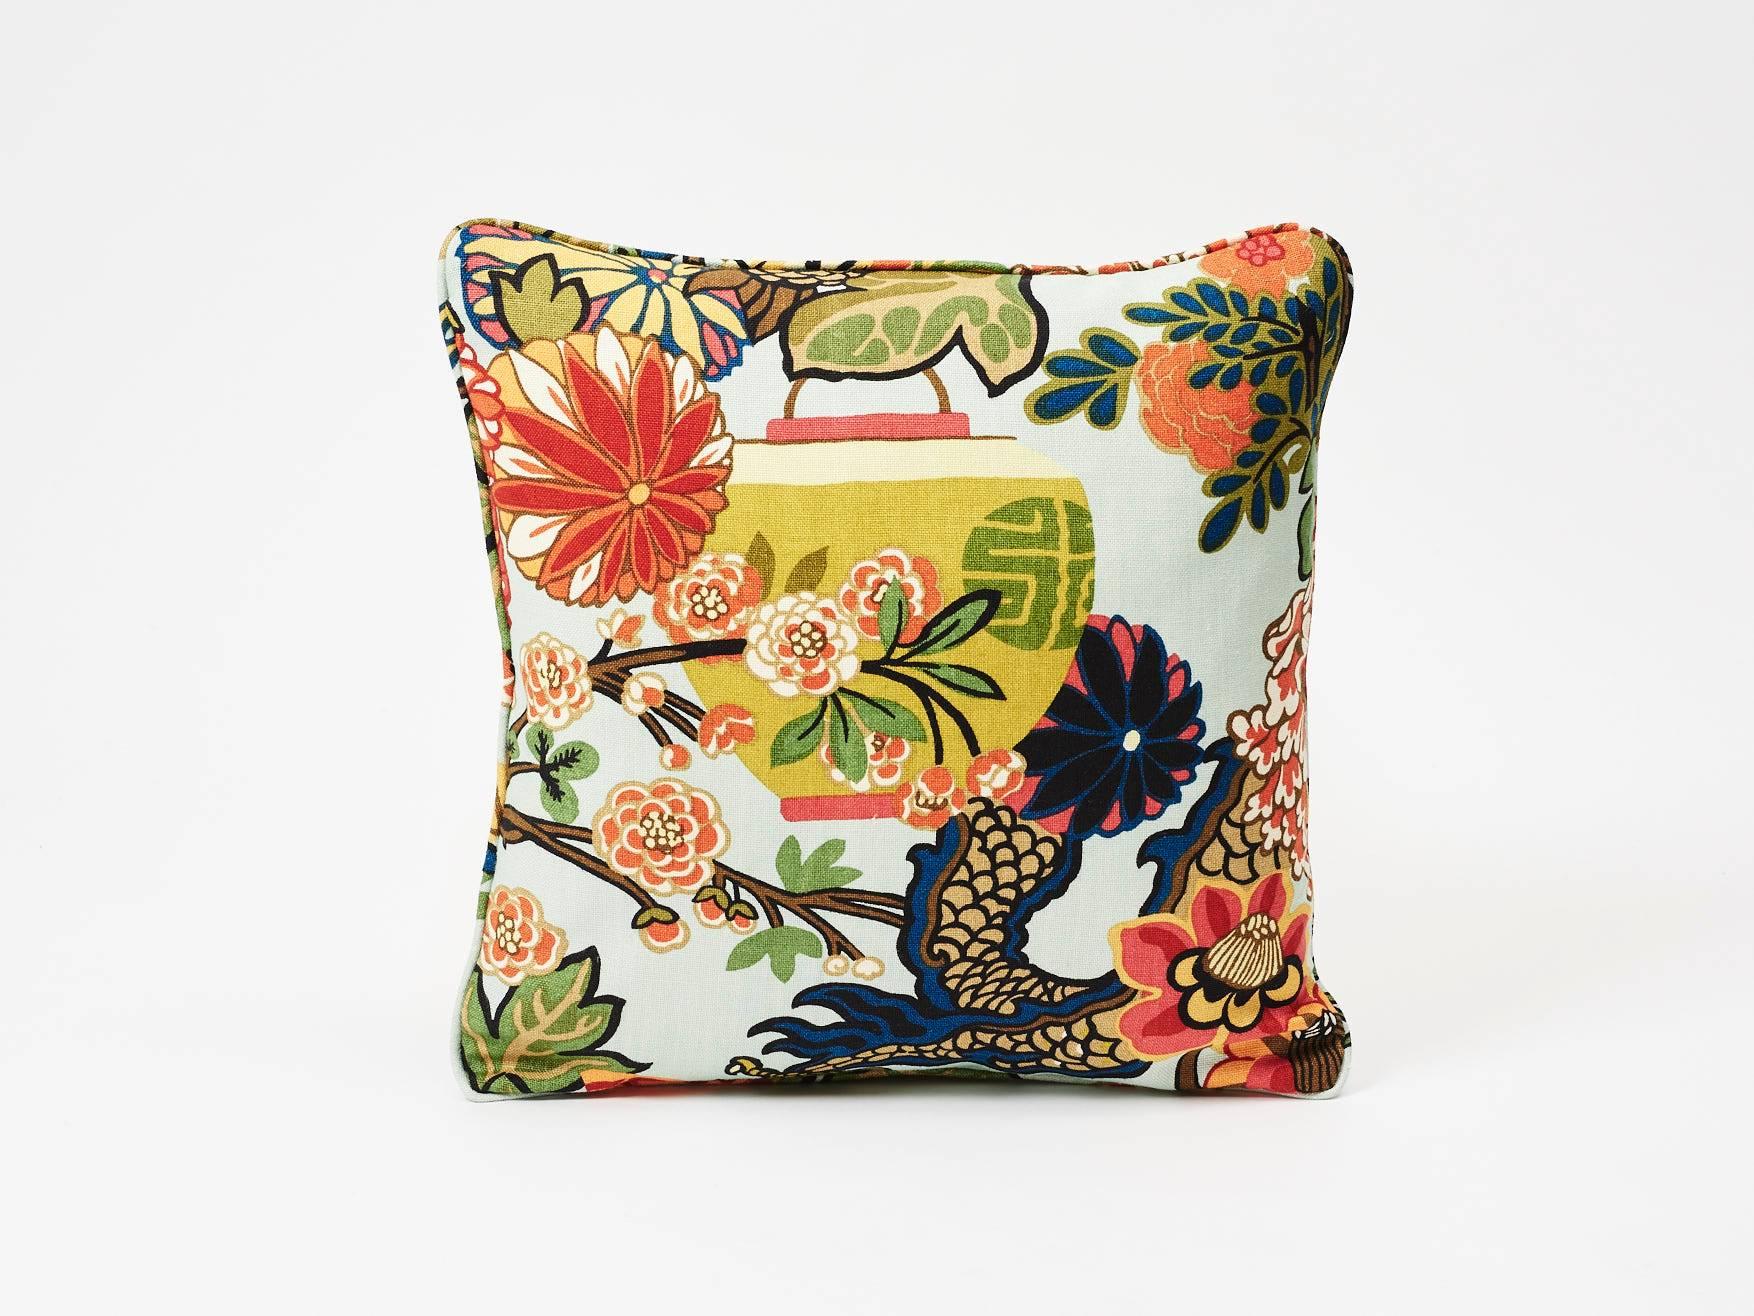 An instant hit from the moment we introduced it, Chiang Mai Dragon is one of our best-loved designs. The chinoiserie motif was inspired by an Art Deco print. Now featured as an exquisite accent, this is sure to be a timeless addition to any interior